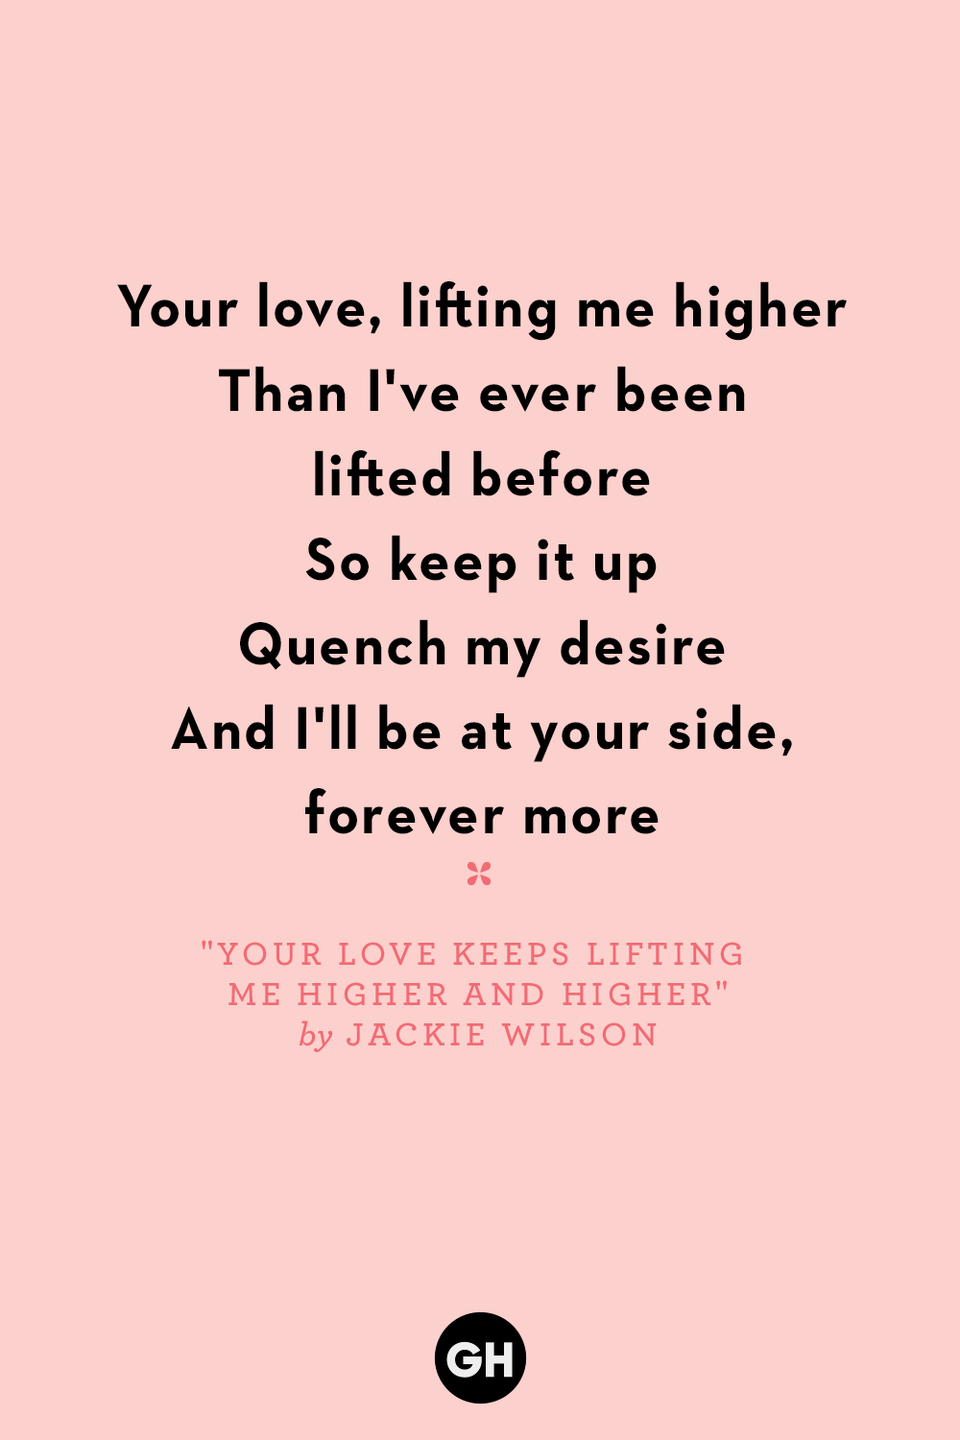 "Your Love Keeps Lifting Me Higher And Higher" by Jackie Wilson